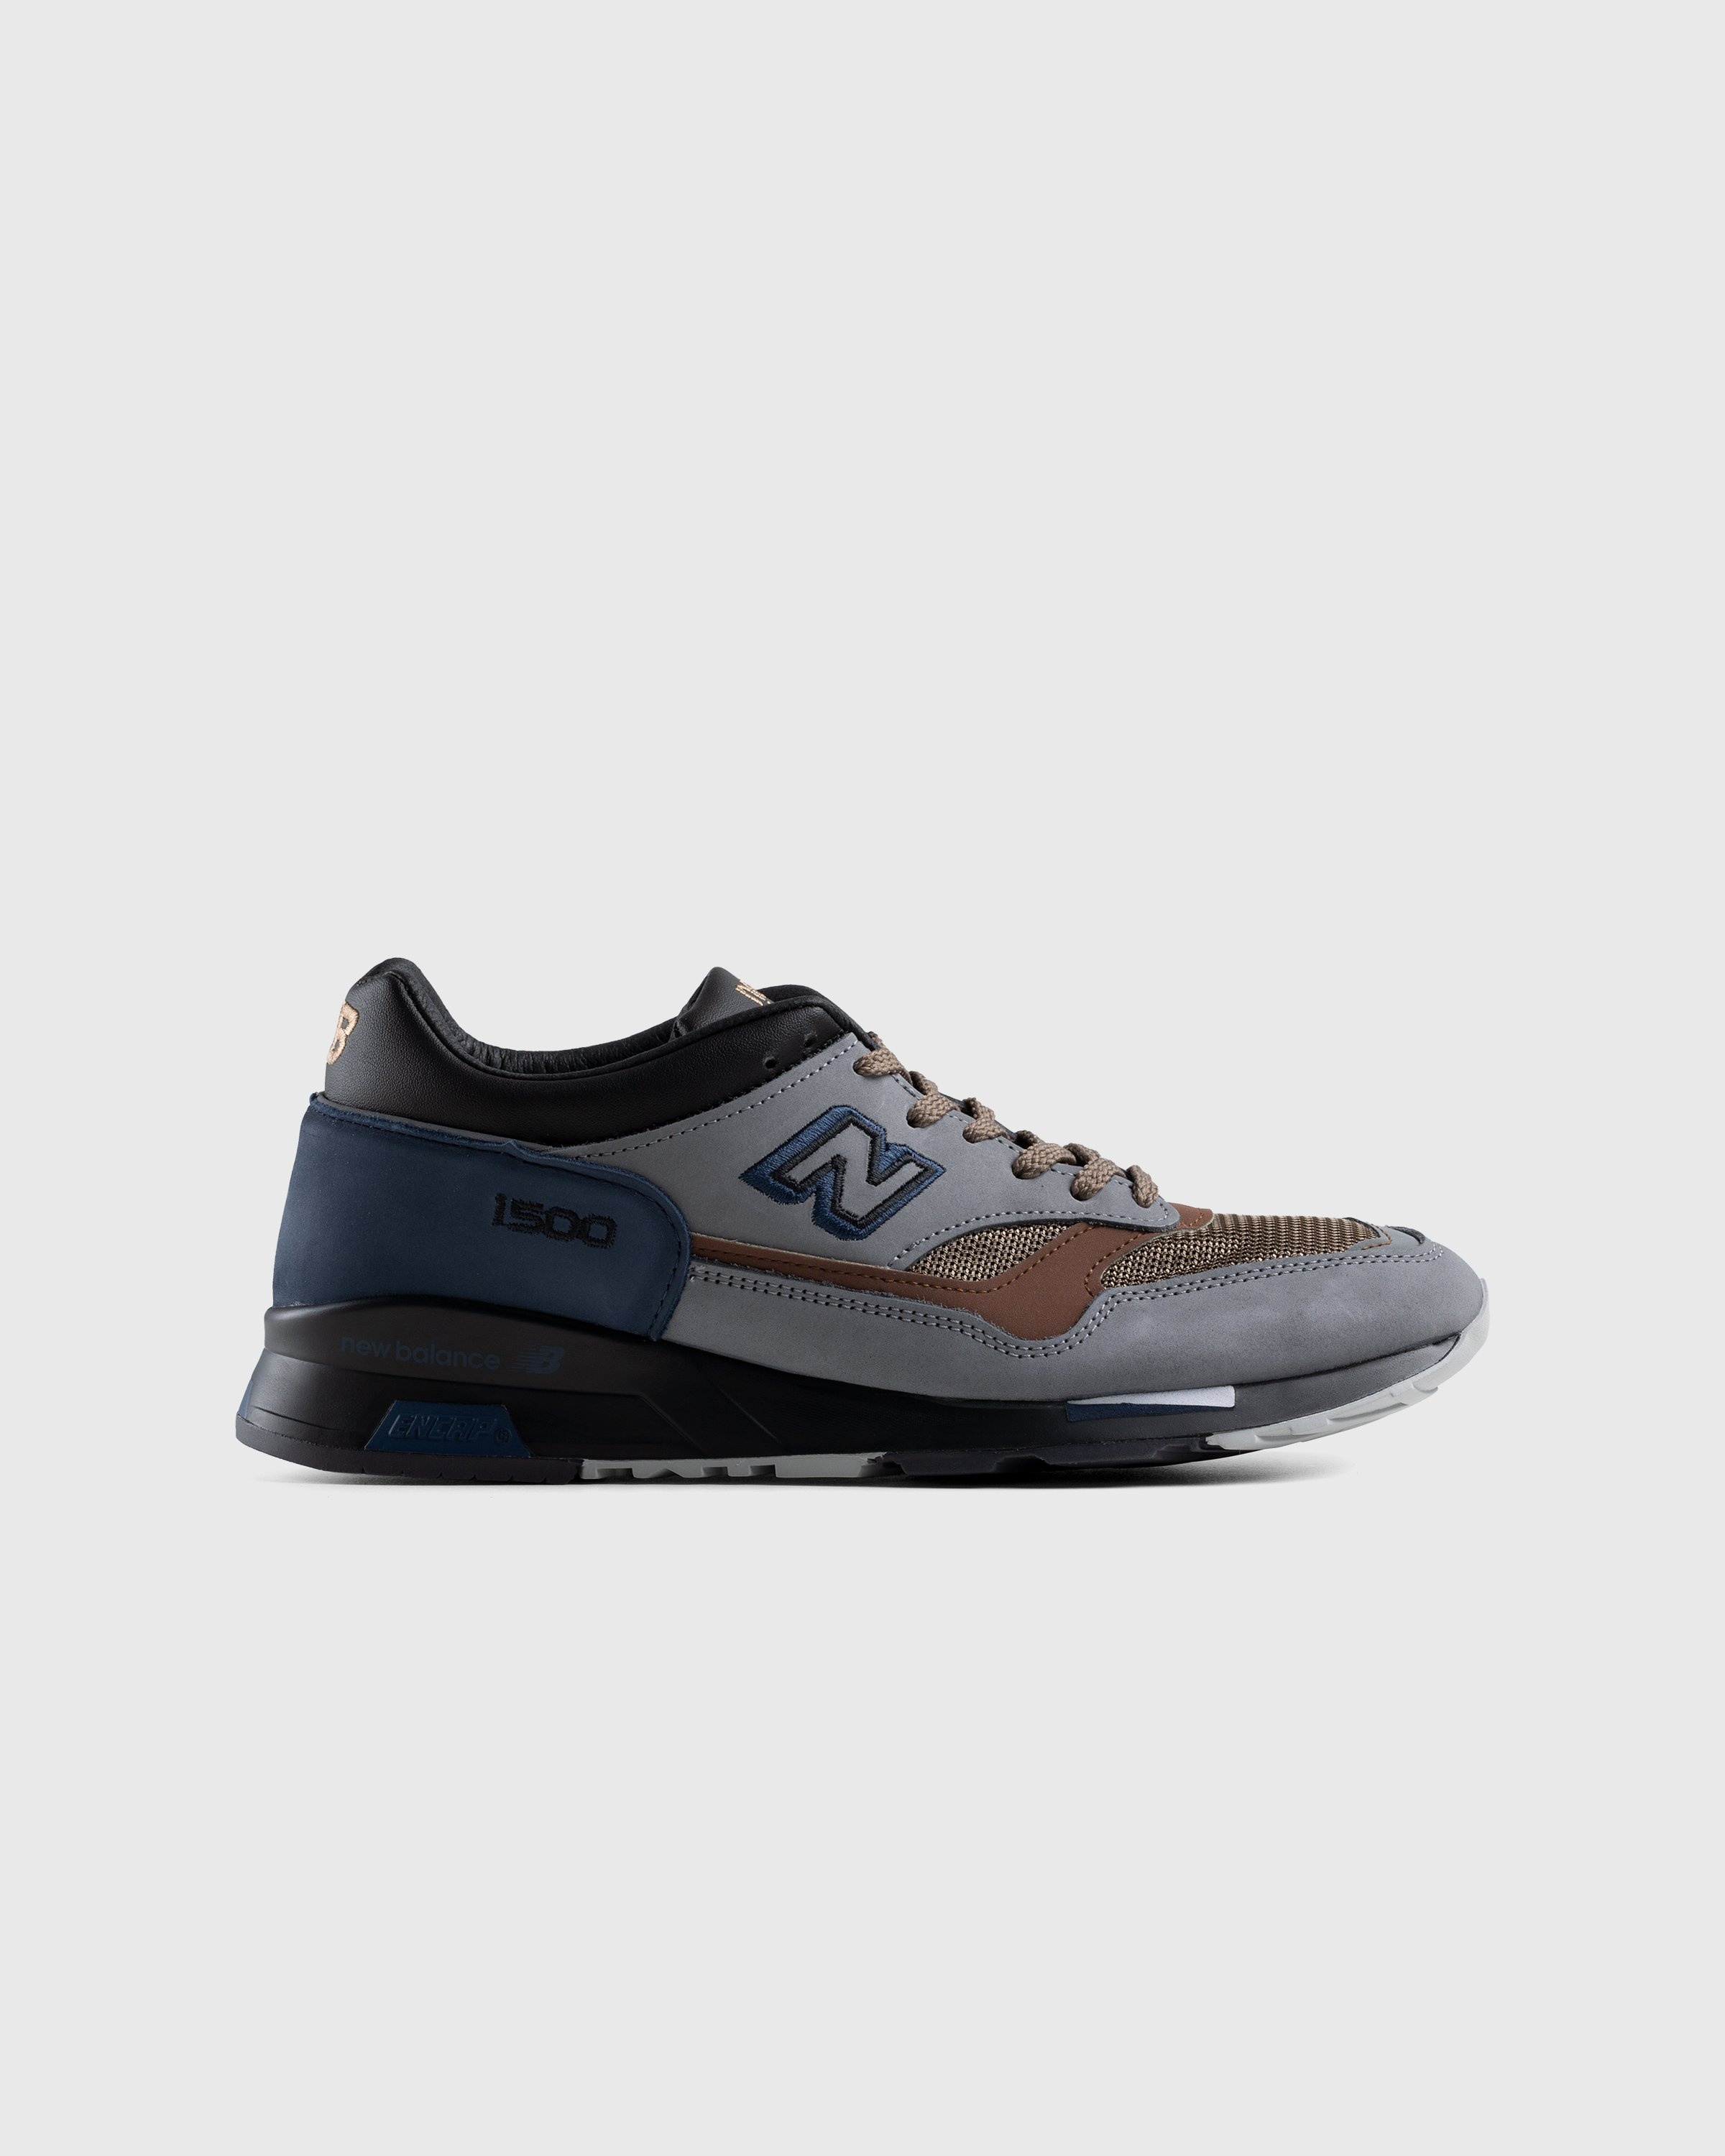 New Balance – M1500INV Grey/Black - Low Top Sneakers - Grey - Image 1